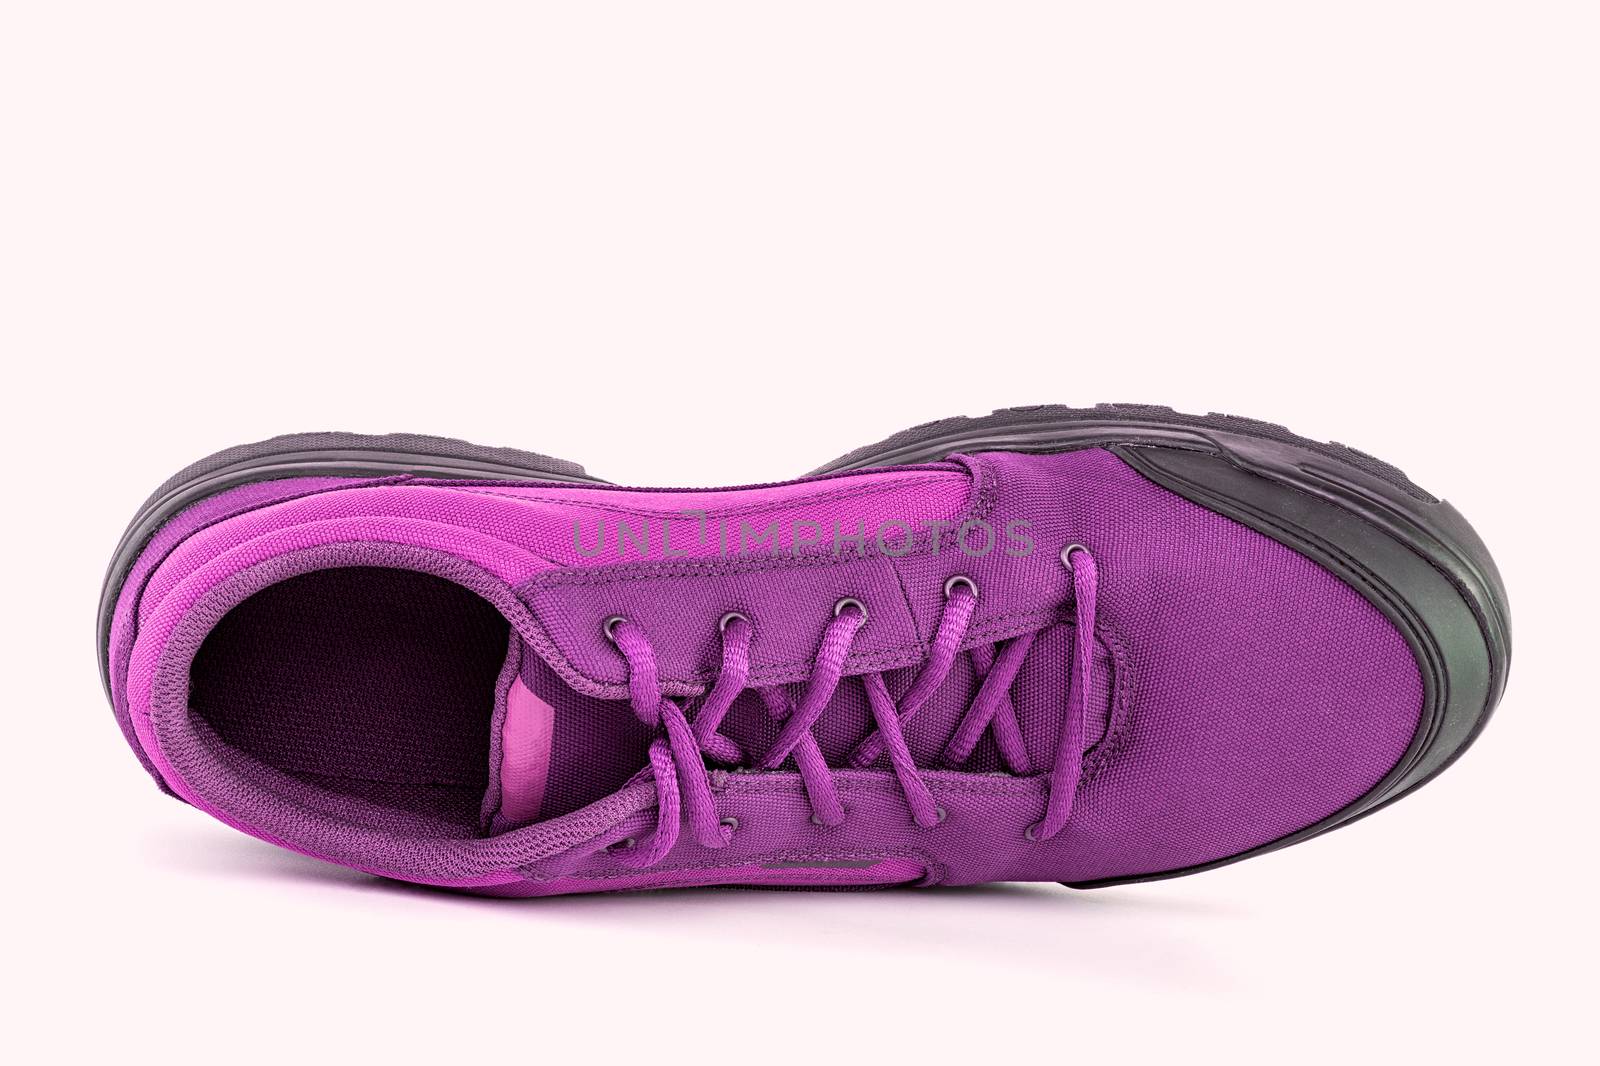 right cheap pink hiking or hunting shoe isolated on white background - view from above by z1b